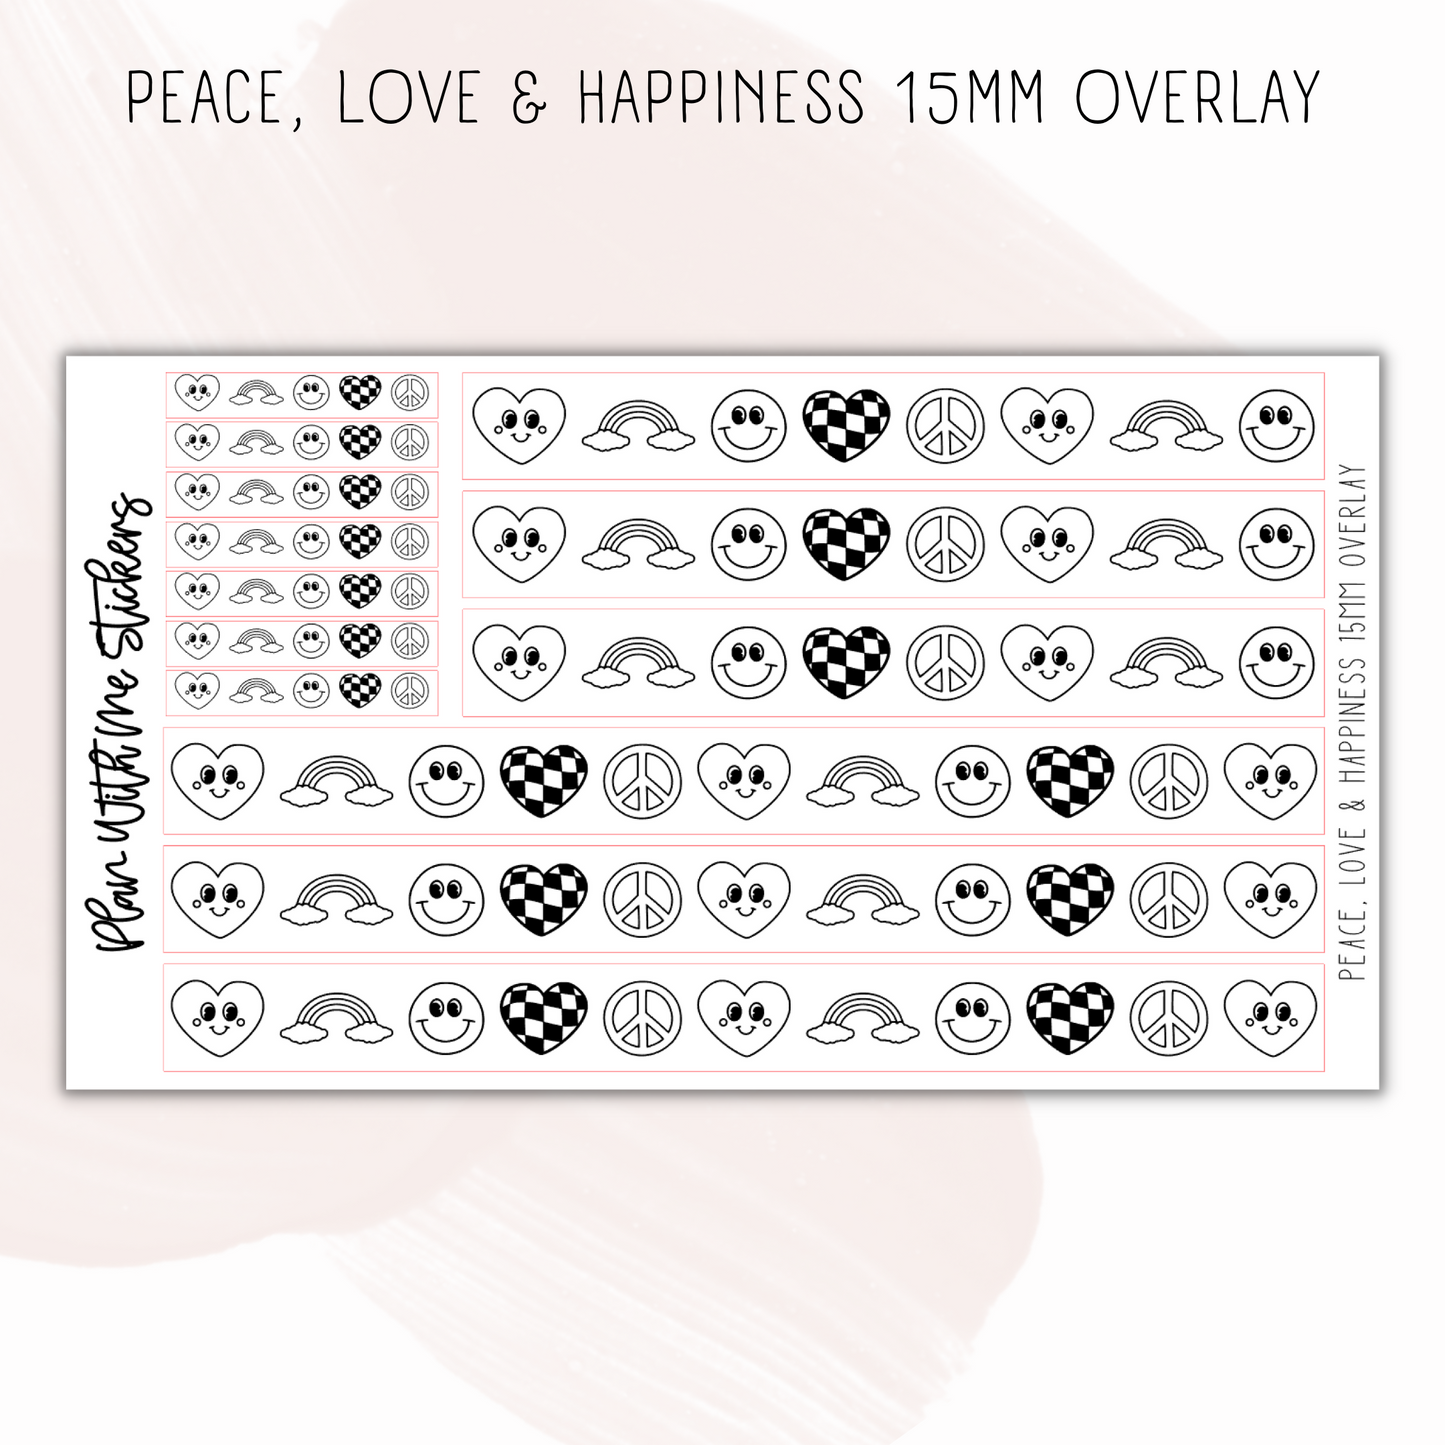 Peace, Love, & Happiness 15mm Overlays